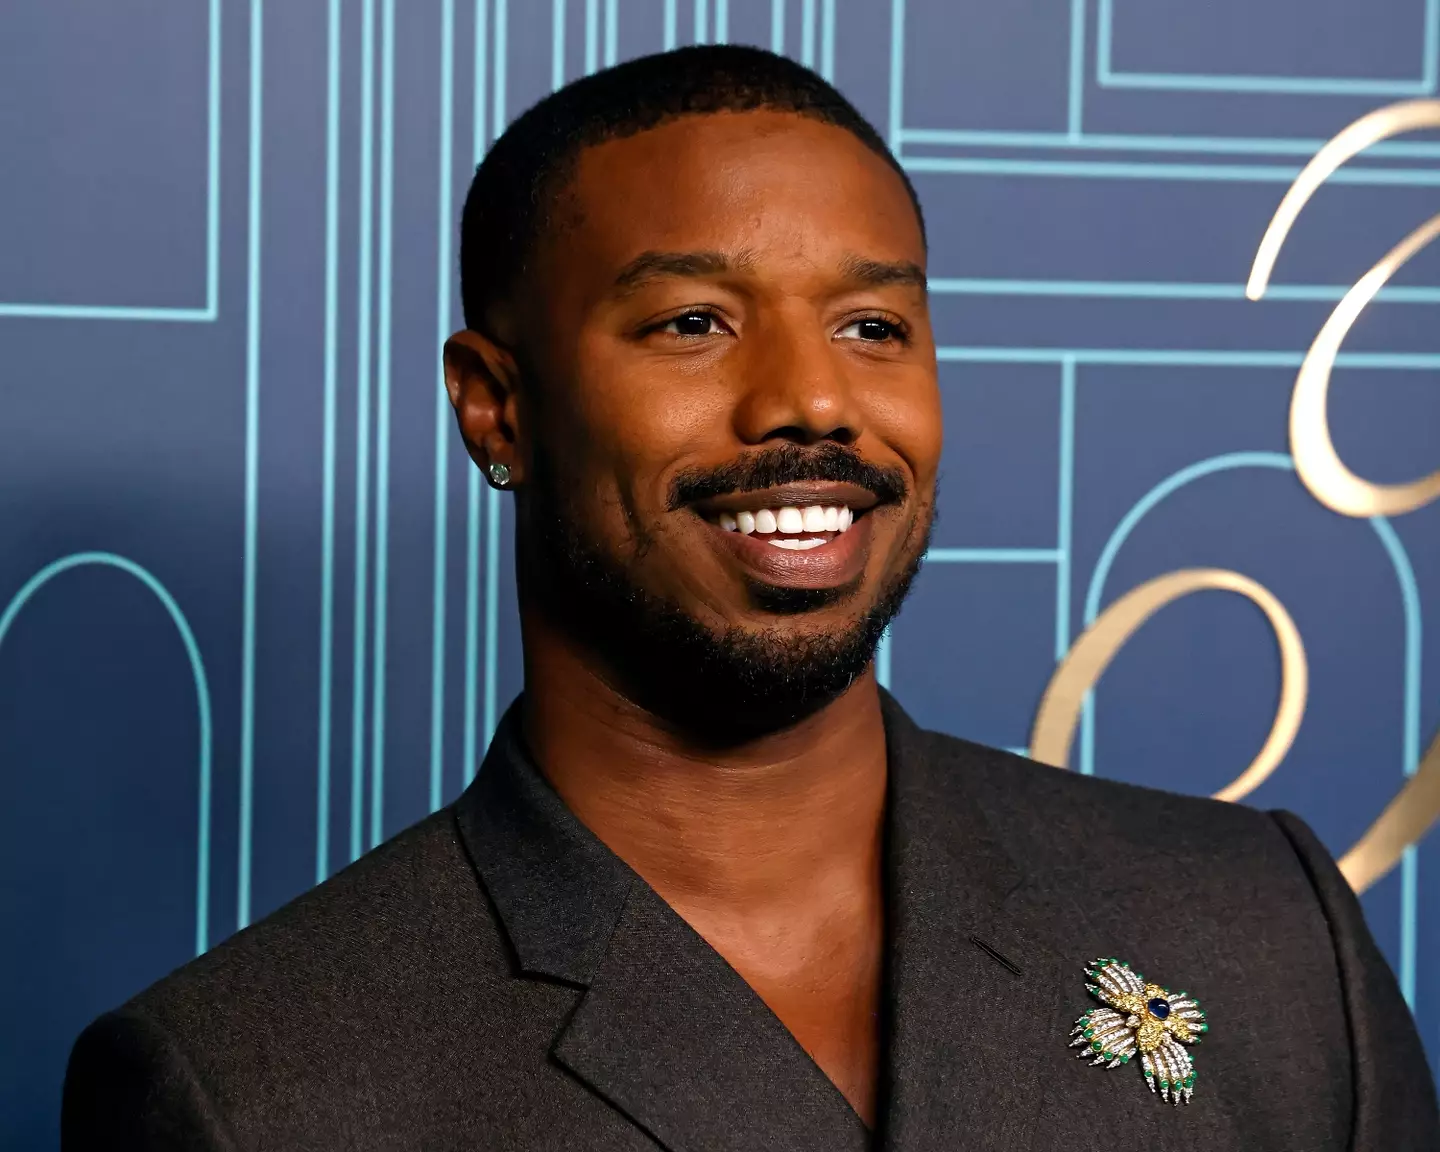 The reality TV star claimed she had a fling with actor Michael B. Jordan.